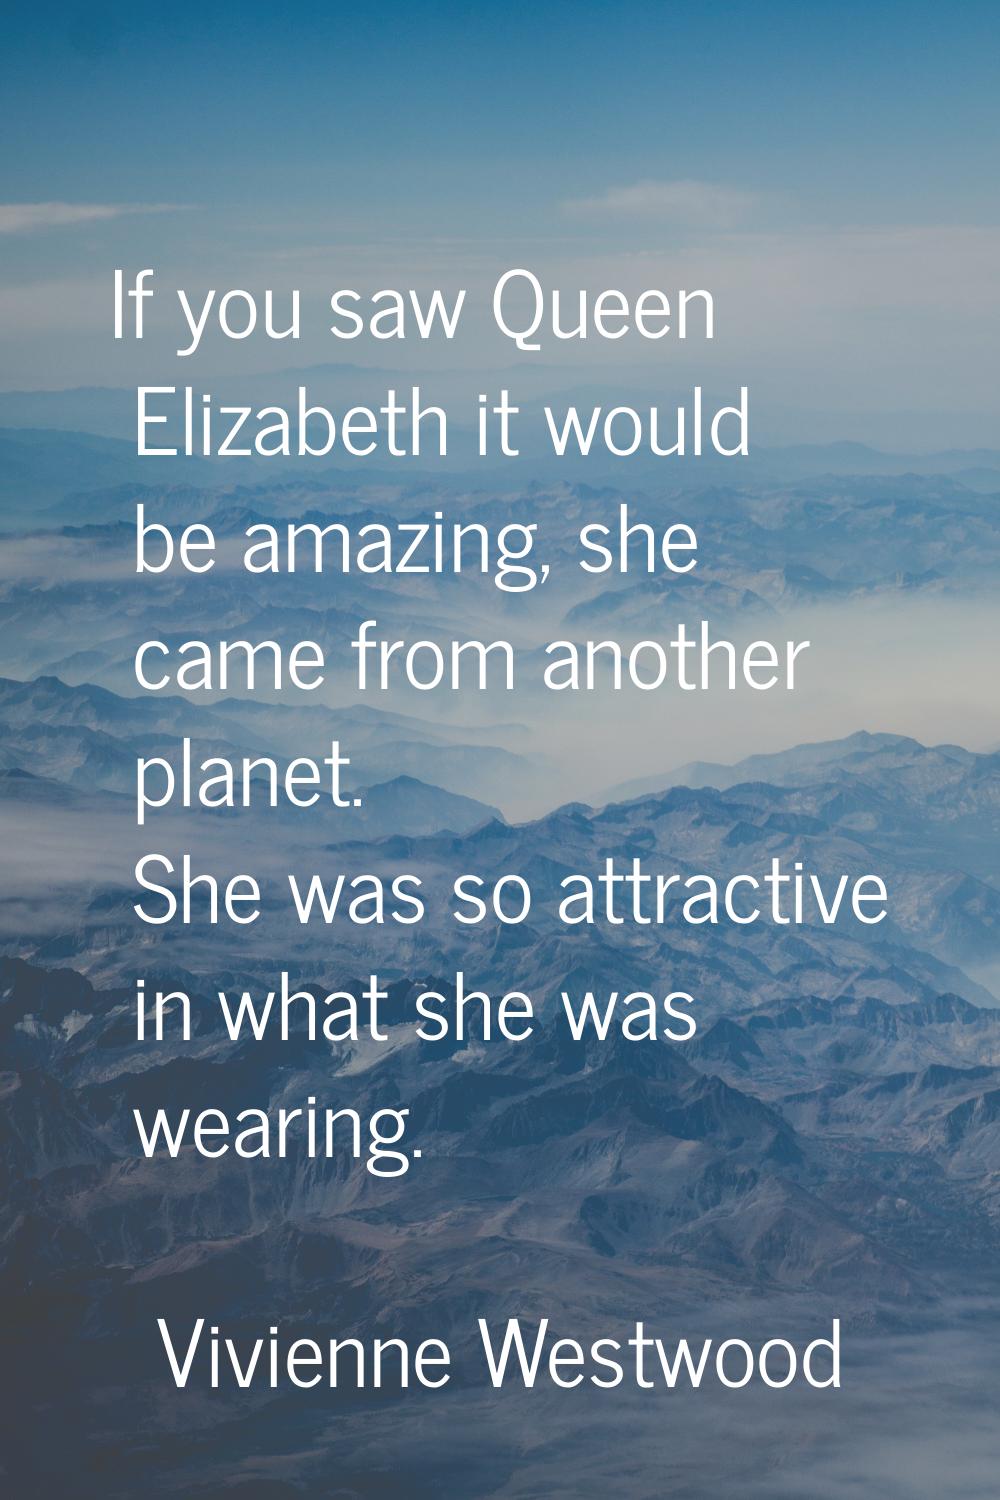 If you saw Queen Elizabeth it would be amazing, she came from another planet. She was so attractive